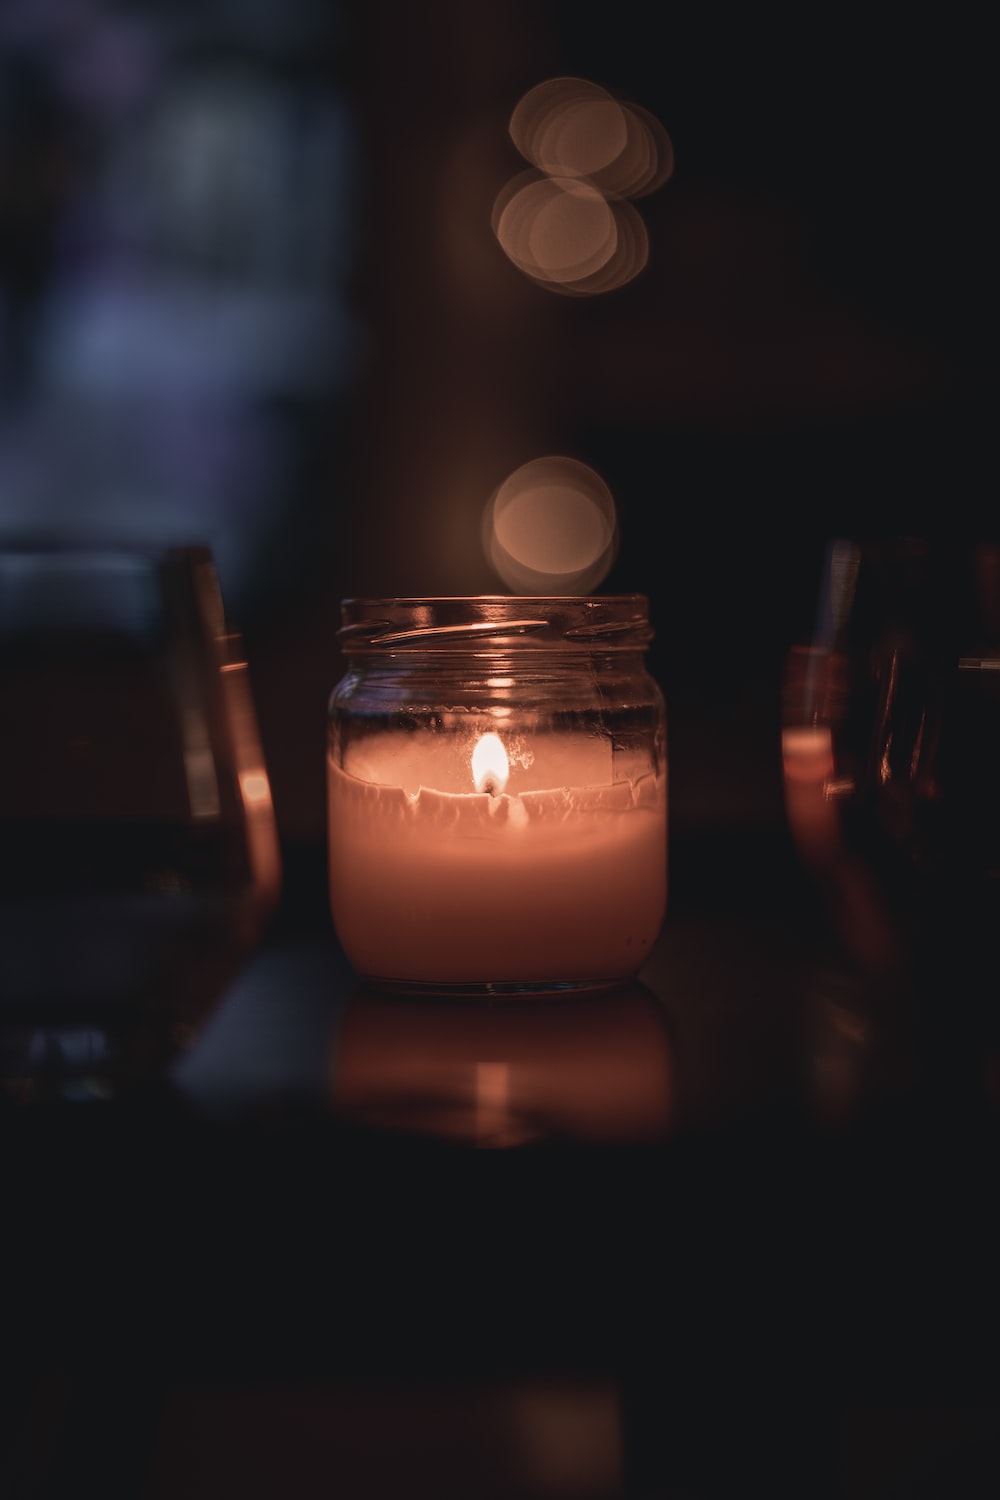 Cozy Night Picture. Download Free Image